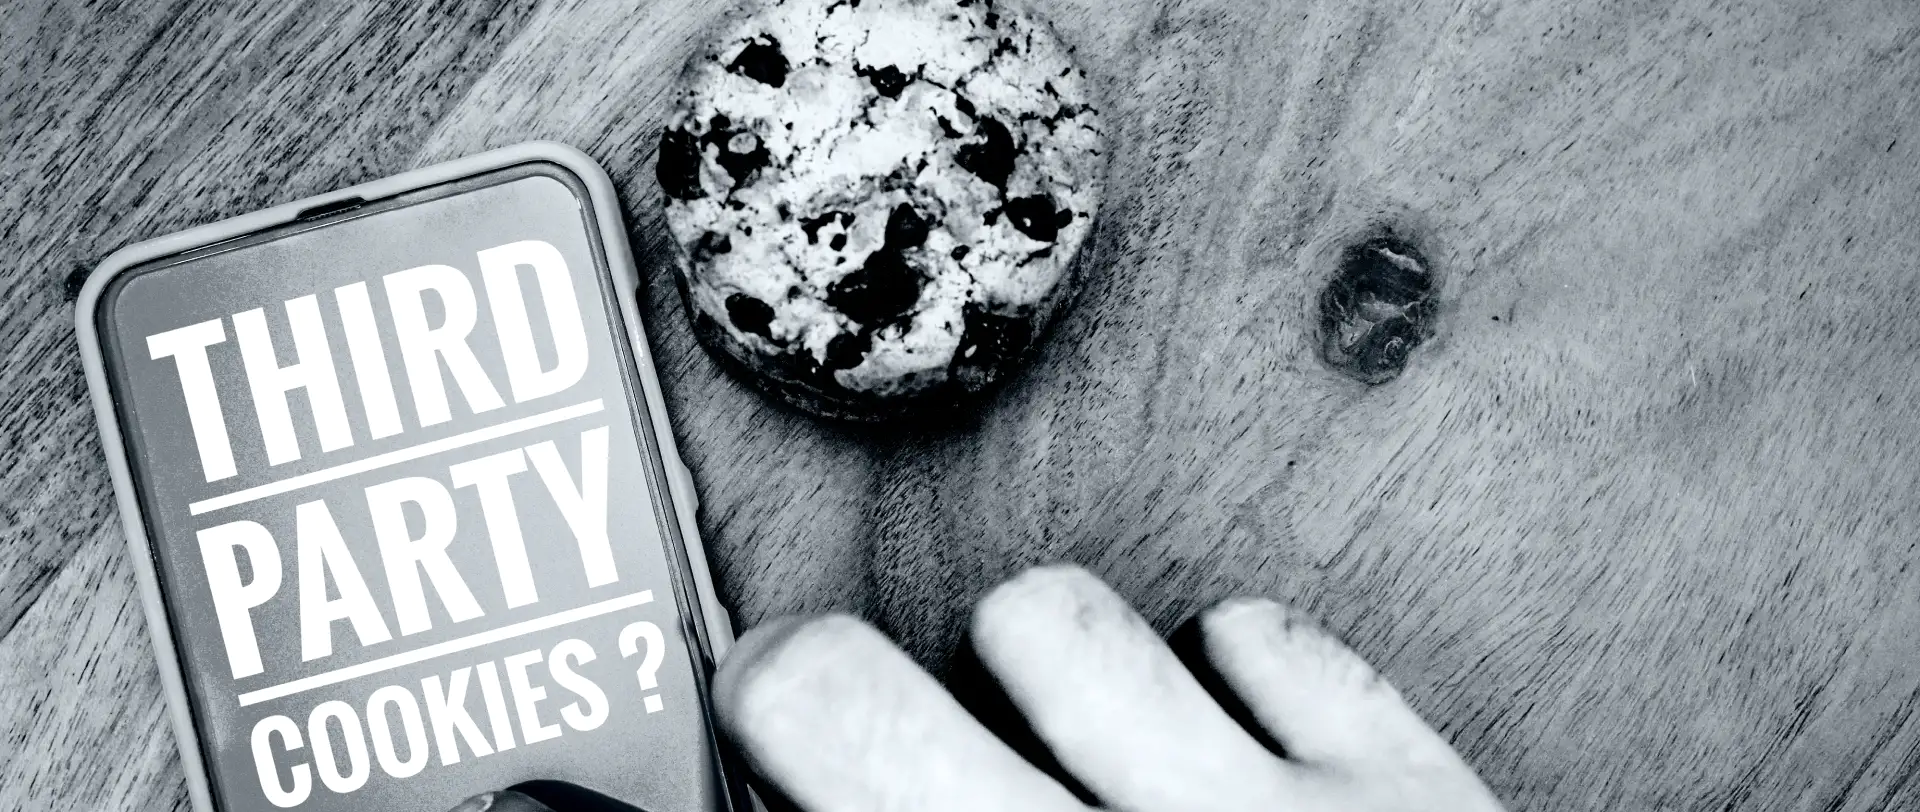 Tracking ohne Cookies: 5 Alternativen beim cookieless Tracking